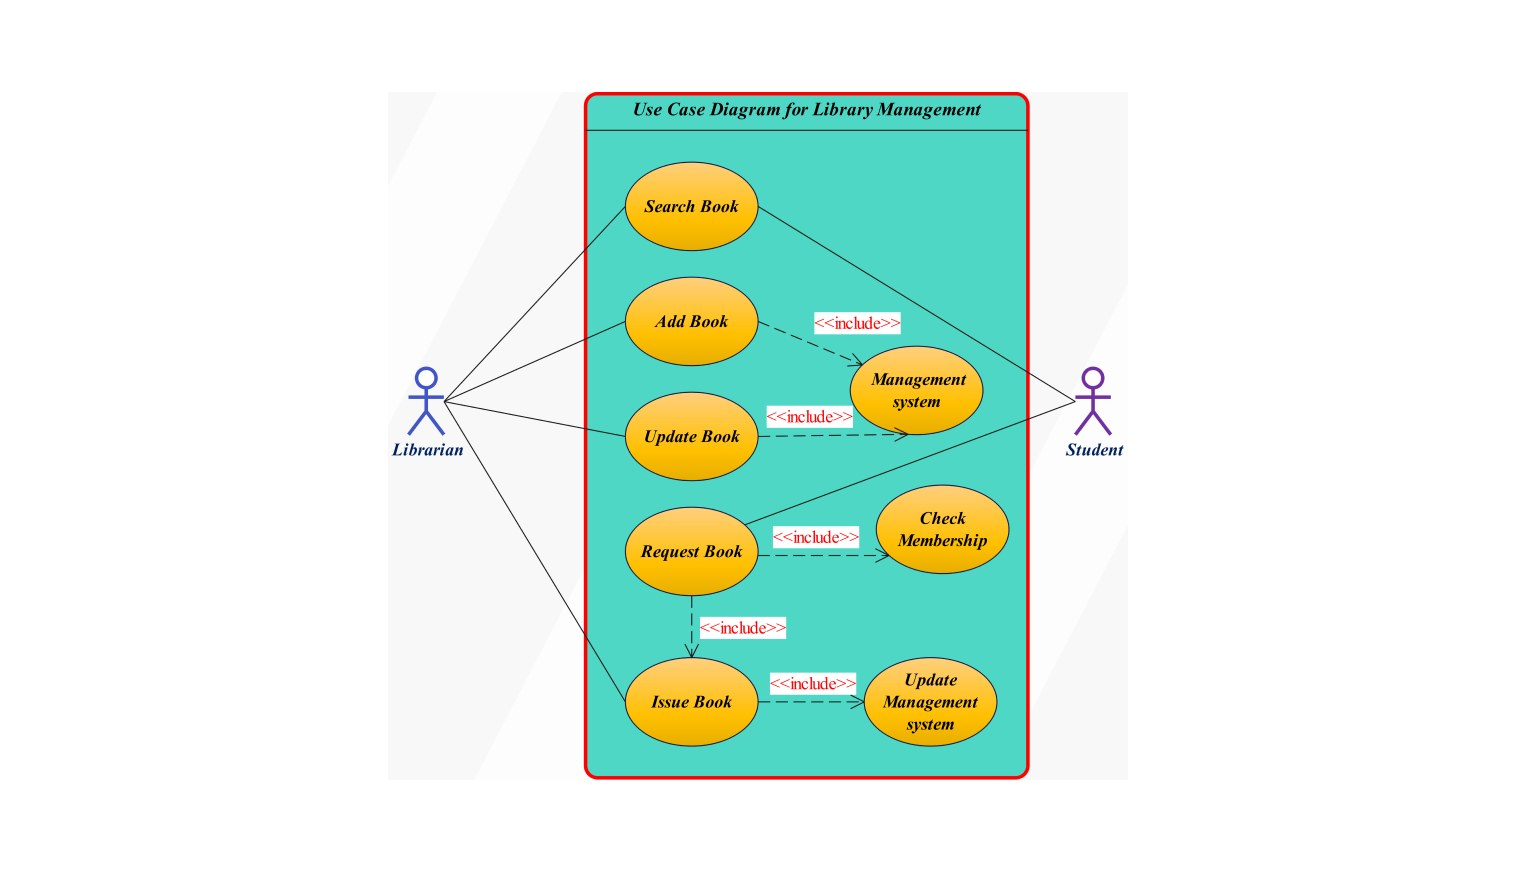 Use Case diagram for library management